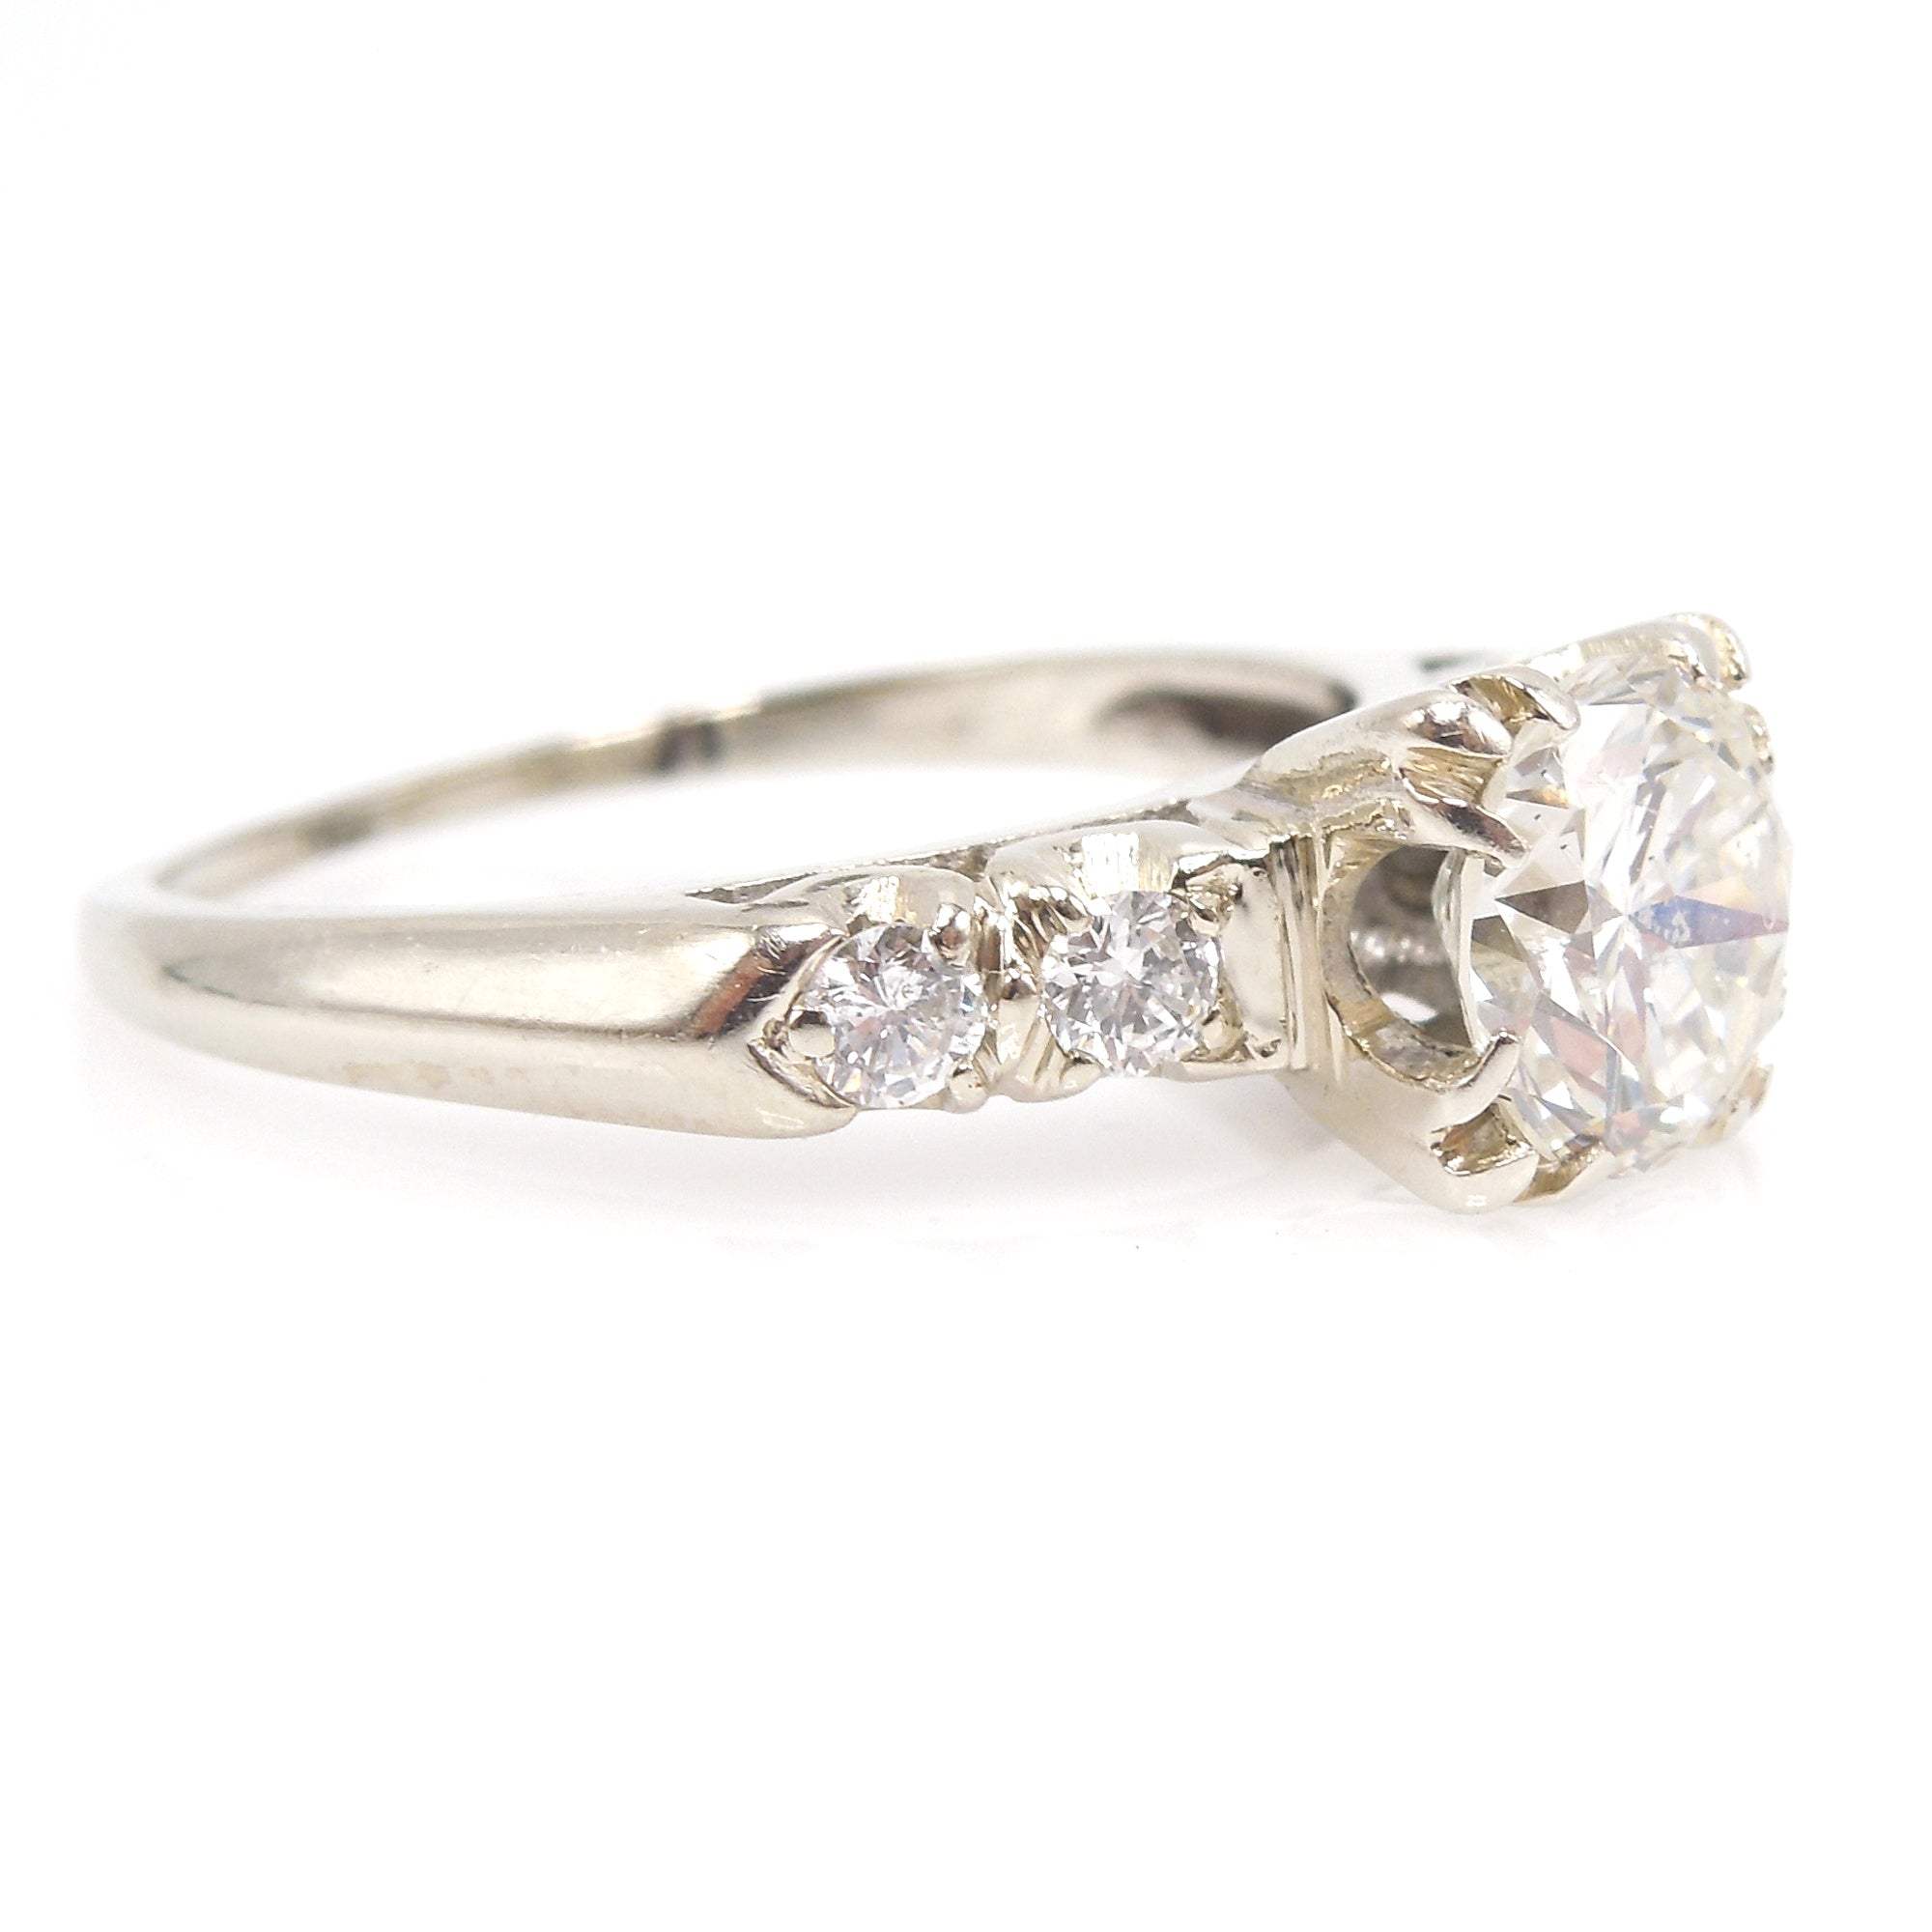 Classic 1 Carat Diamond Ring with Four Accent Diamonds in 14K White Gold